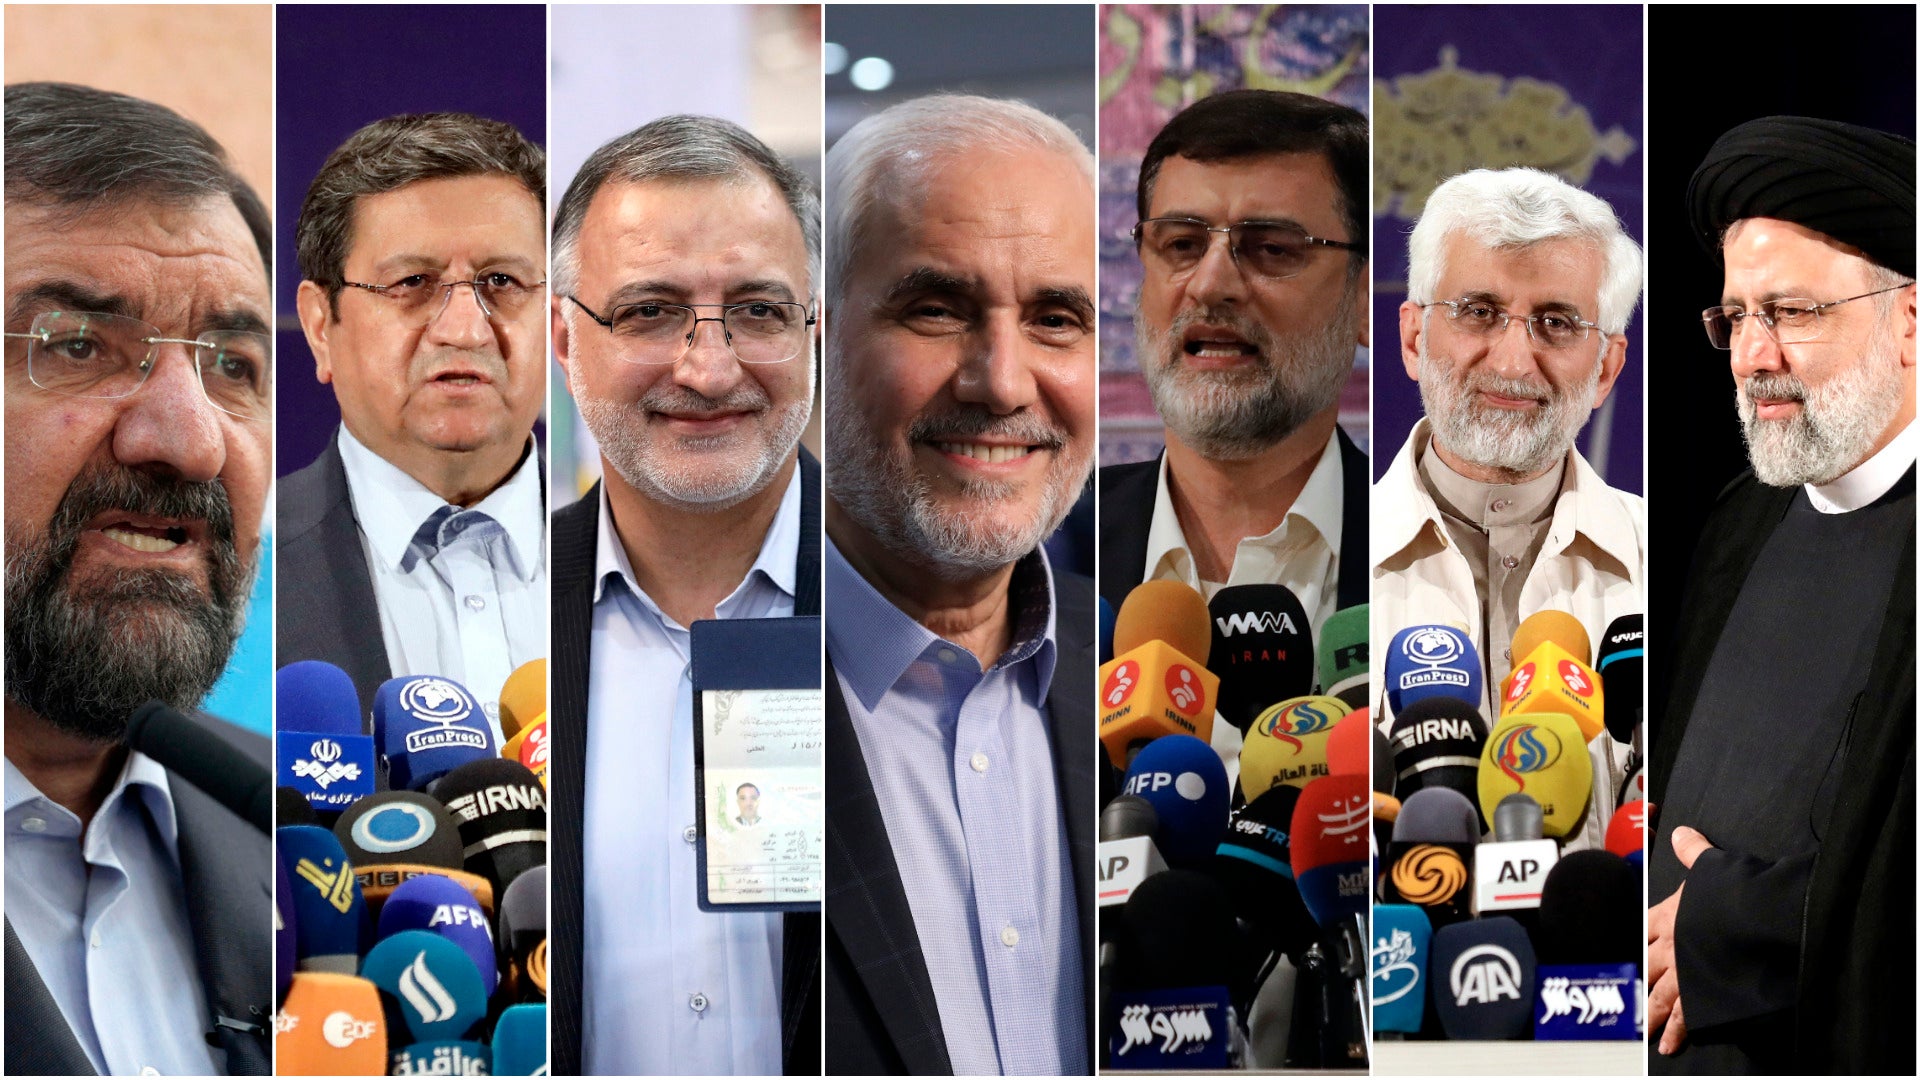 The seven approved candidates for the 18 June elections (l-r): Mohsen Rezaee, a former commander of the Revolutionary Guard, Abdolnaser Hemmati, head of central bank of Iran, Alireza Zakani, a former lawmaker, Mohsen Mehralizadeh, a former provincial governor, Amir Hossein Ghazizadeh Hashemi, deputy parliament speaker, Saeed Jalili, former top nuclear negotiator, Ebrahim Raisi, head of the judiciary.